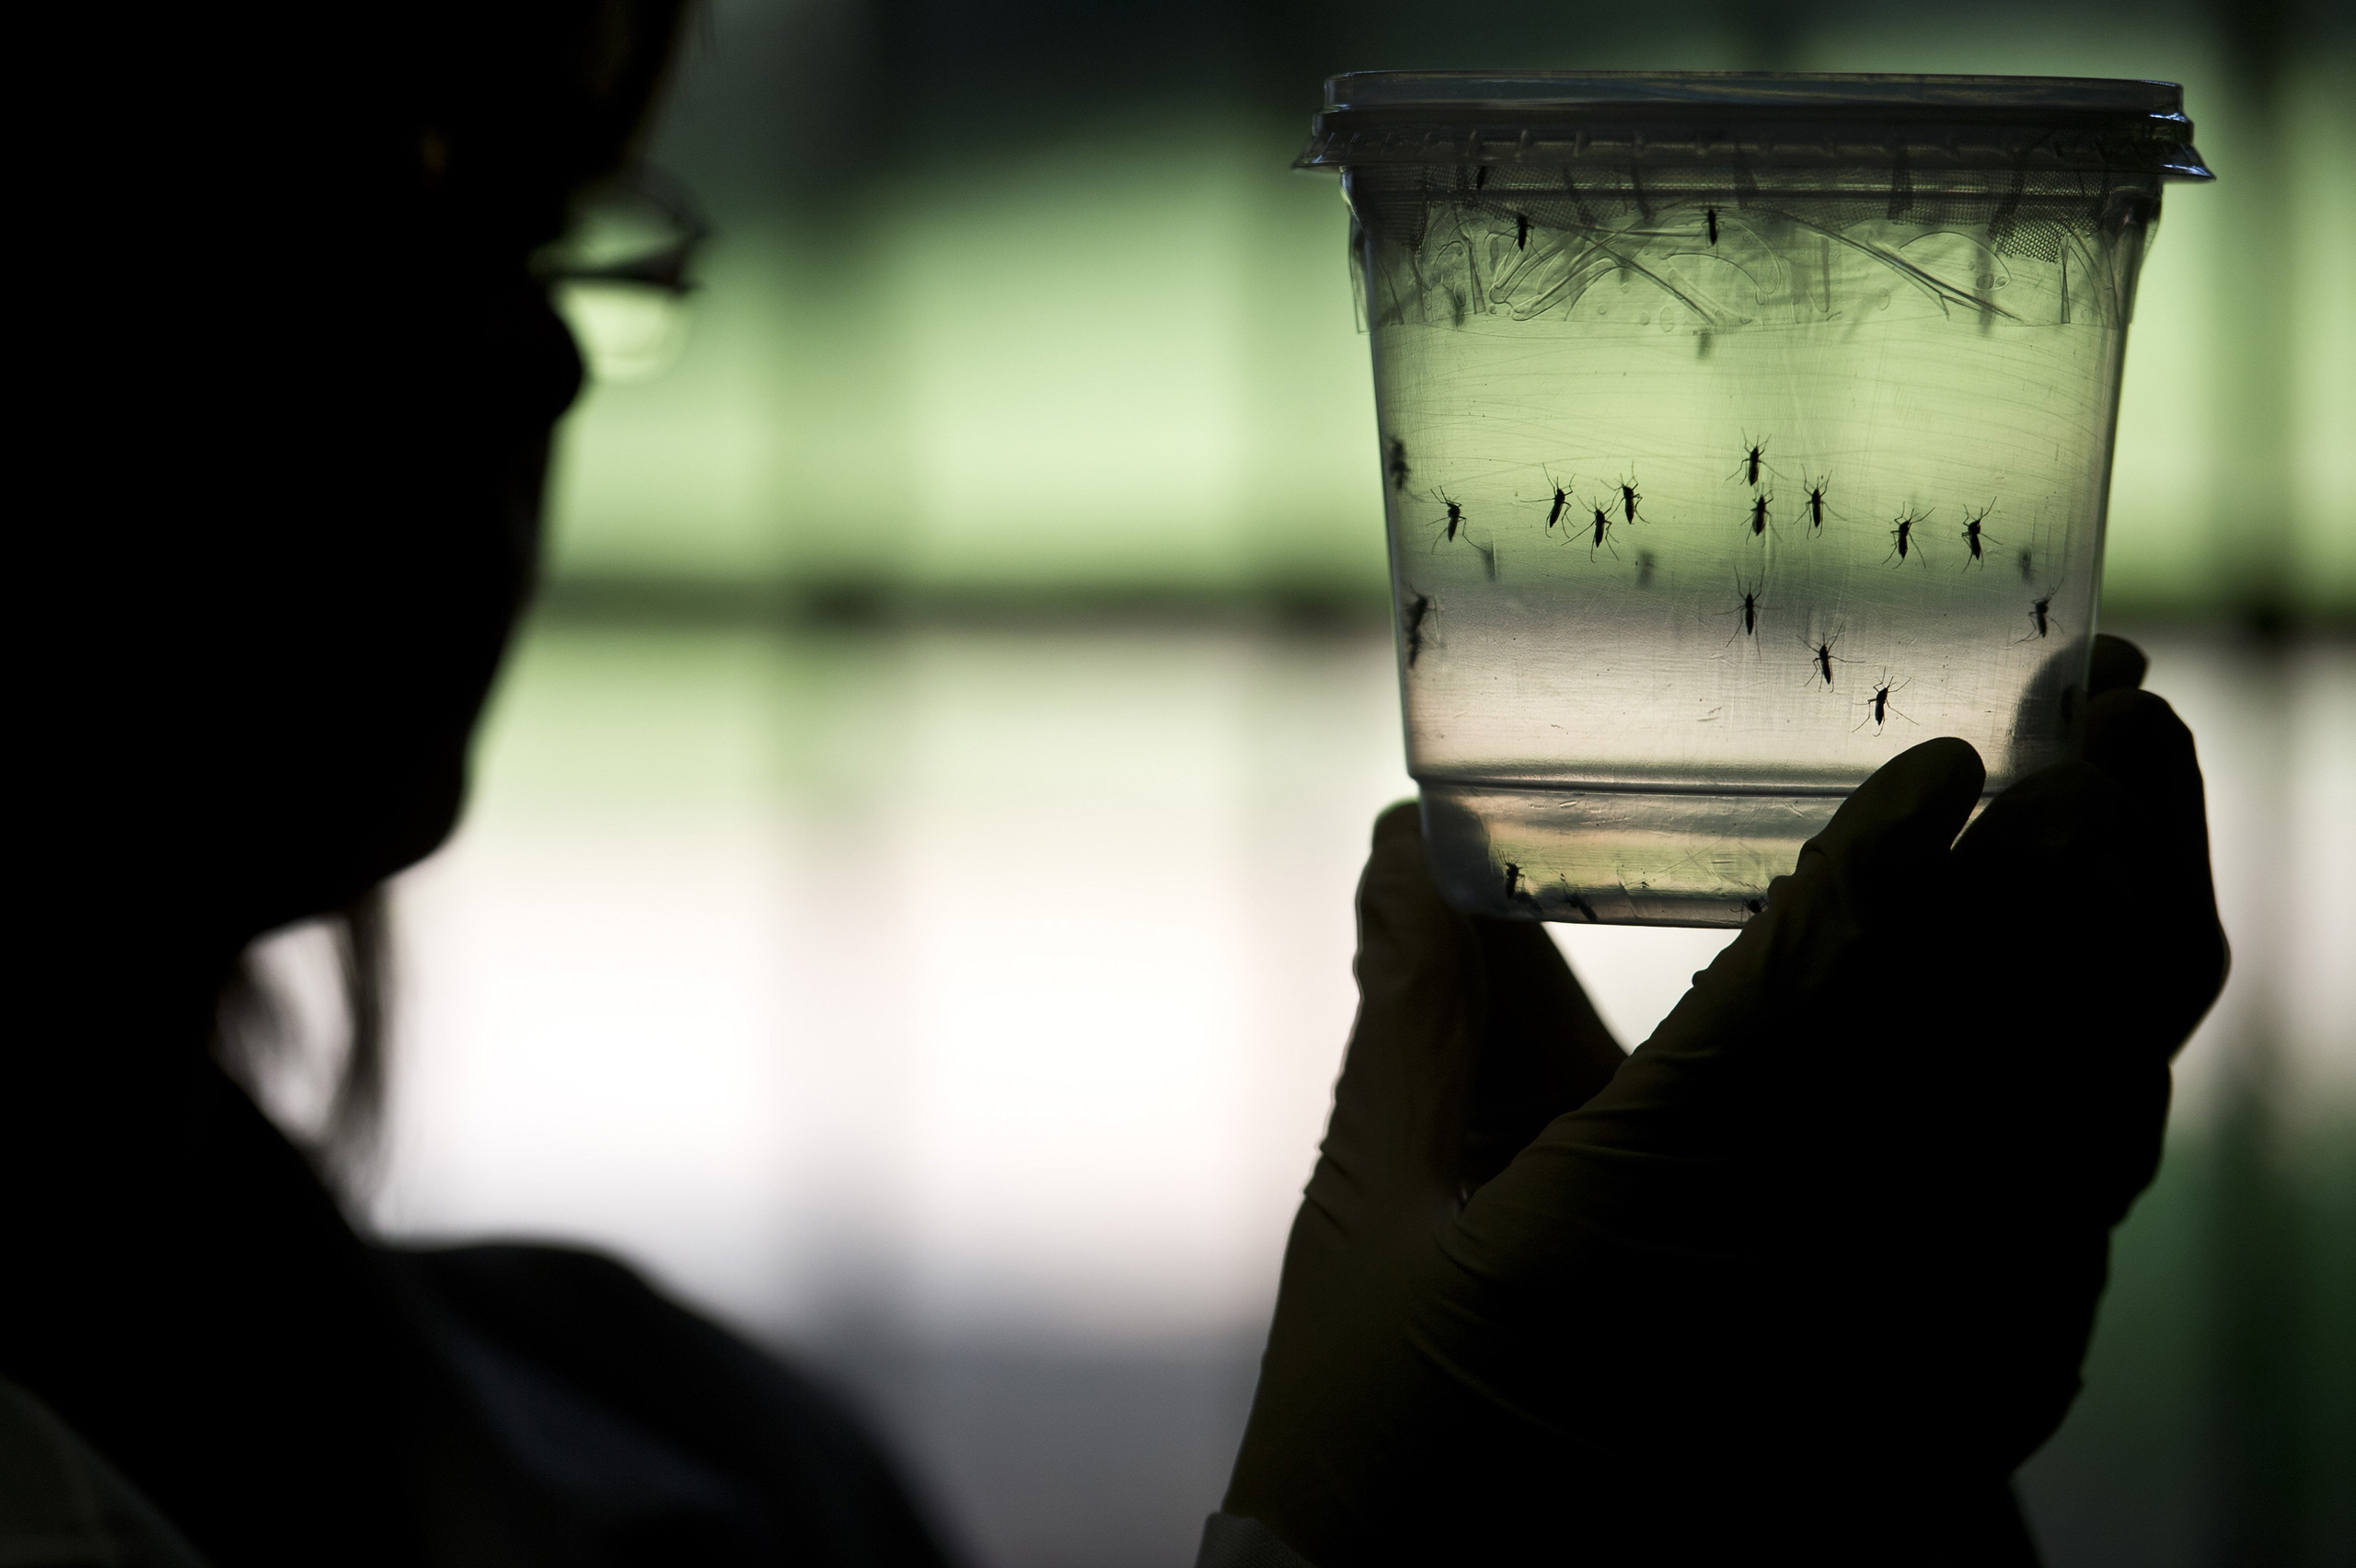 A researcher looks at Aedes aegypti mosquitoes, capable of spreading the Zika virus, at a lab in the Institute of Biomedical Sciences of the University of Sao Paulo, Brazil, on Jan. 8, 2016. (Nelson Almeida—AFP/Getty Images)